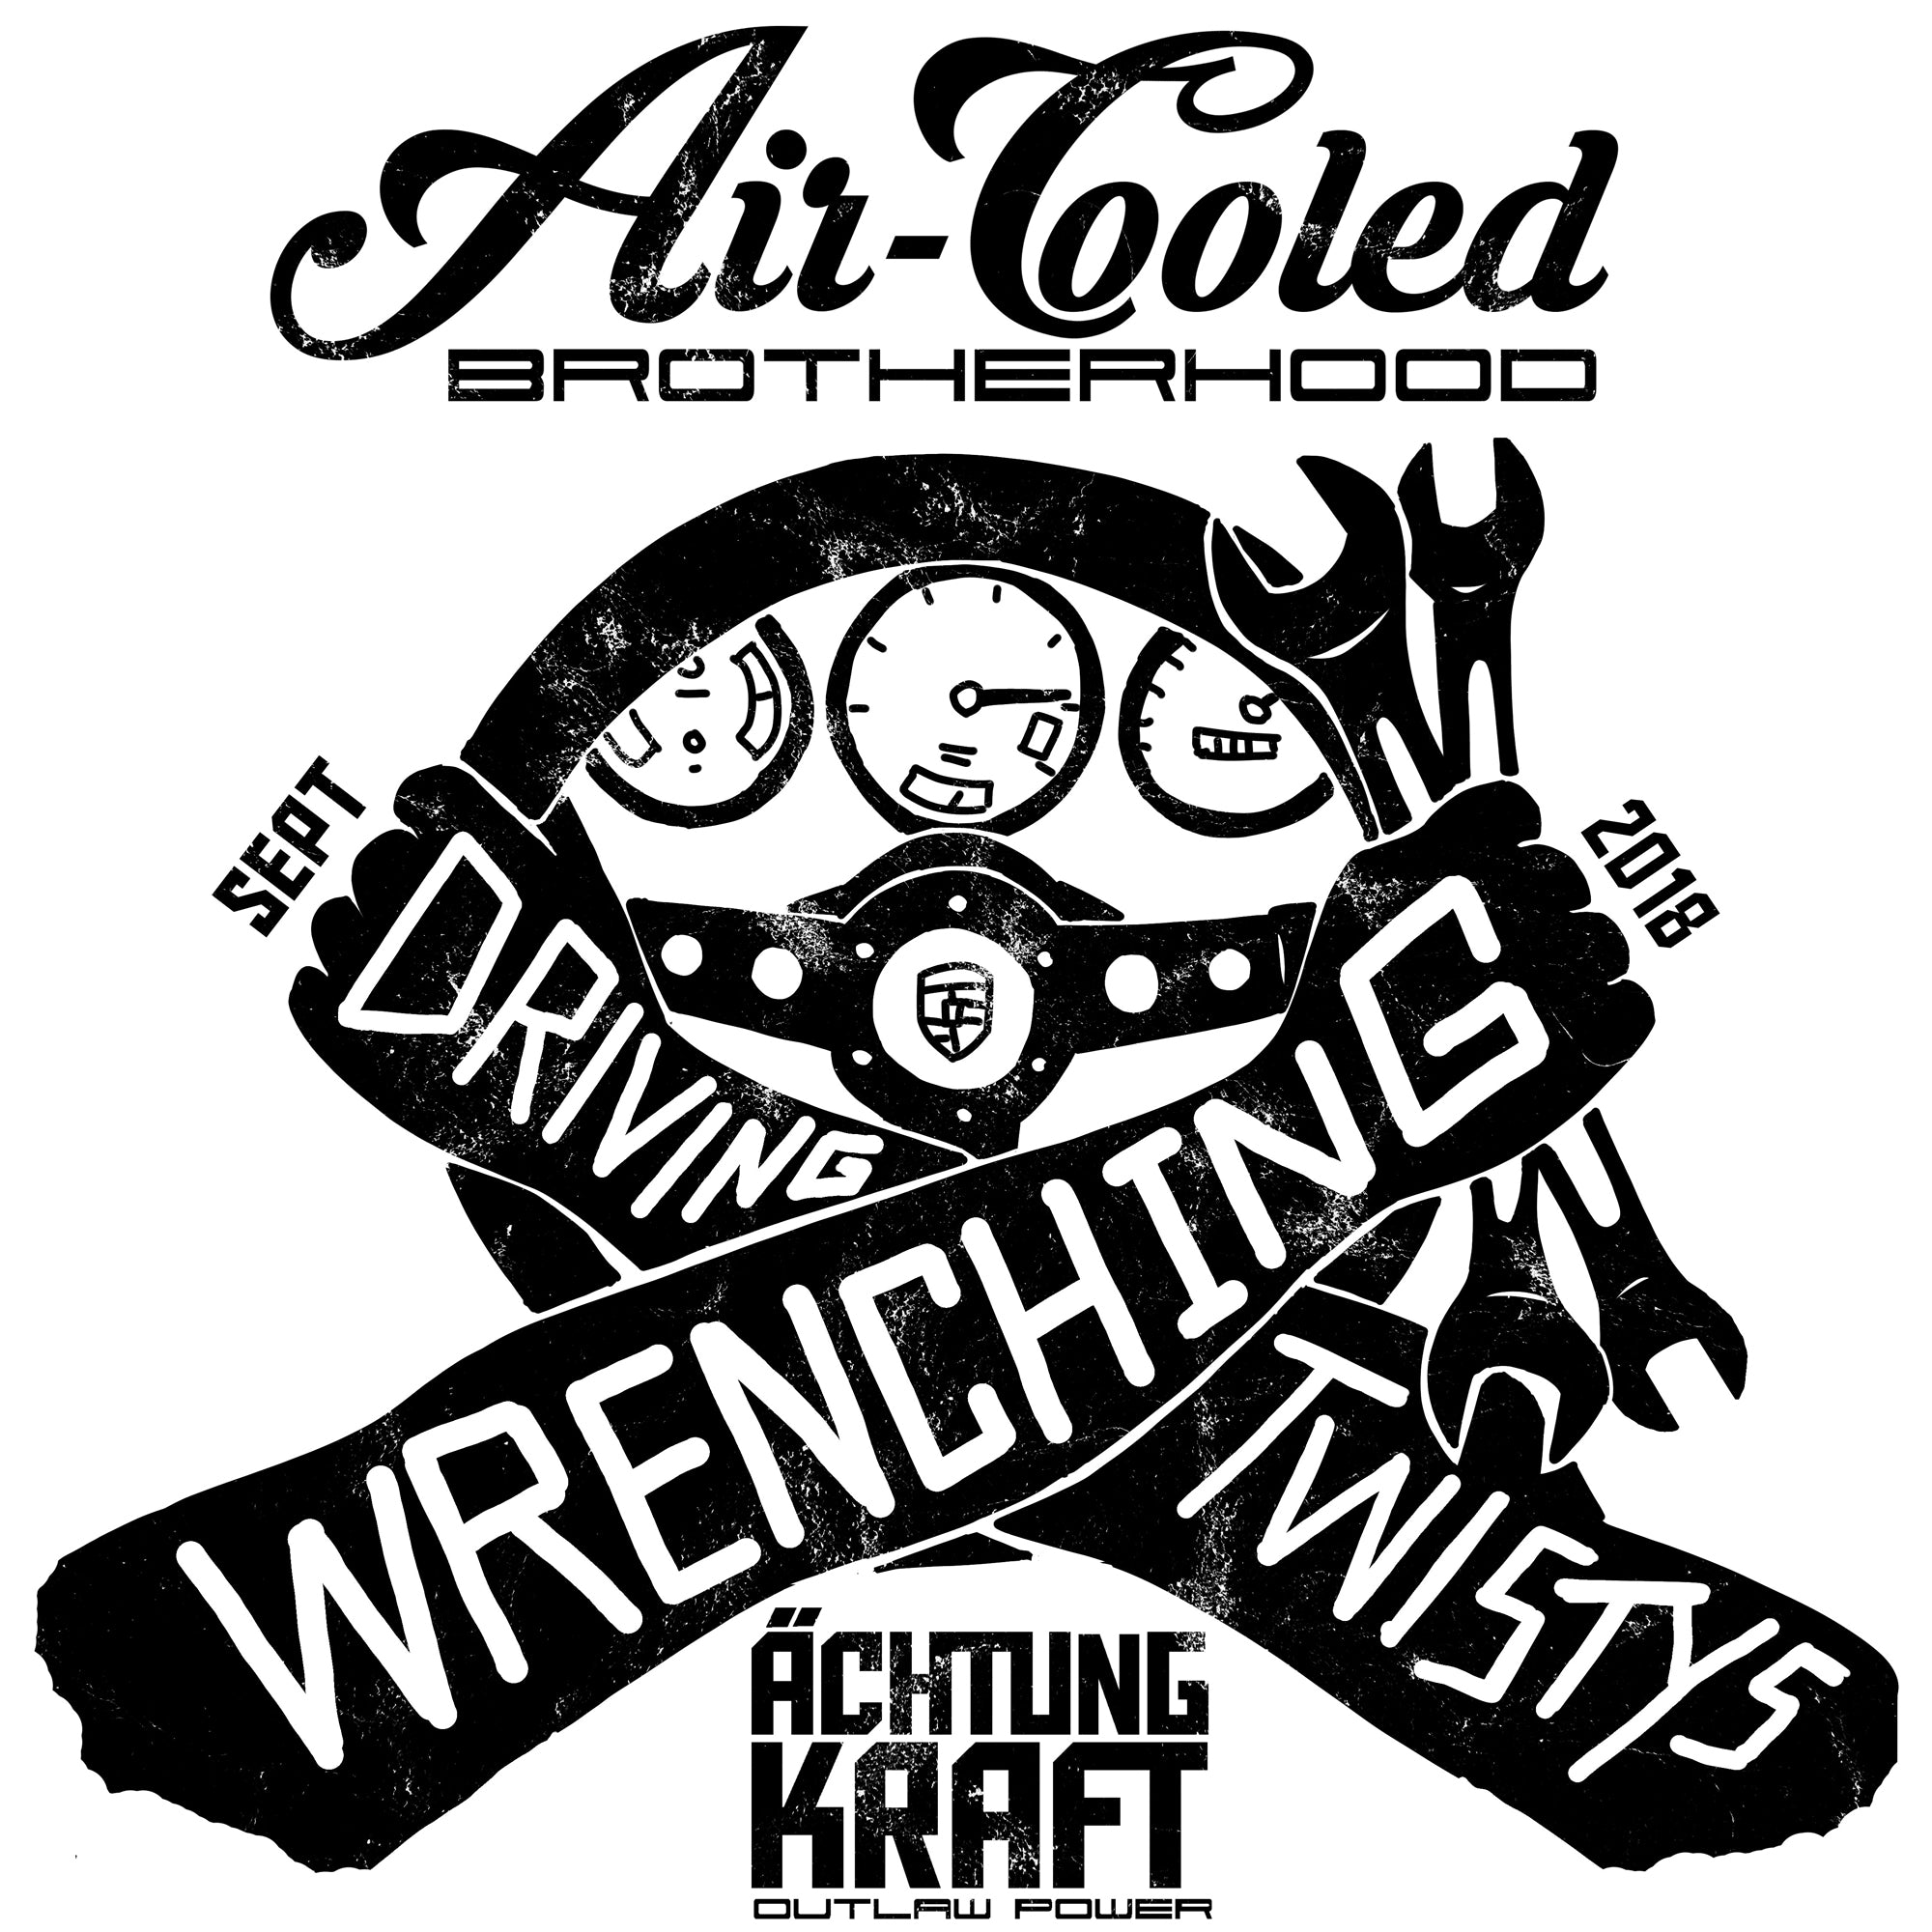 Porsche Air-Cooled Brotherhood - Driving Twistys and Wrenching